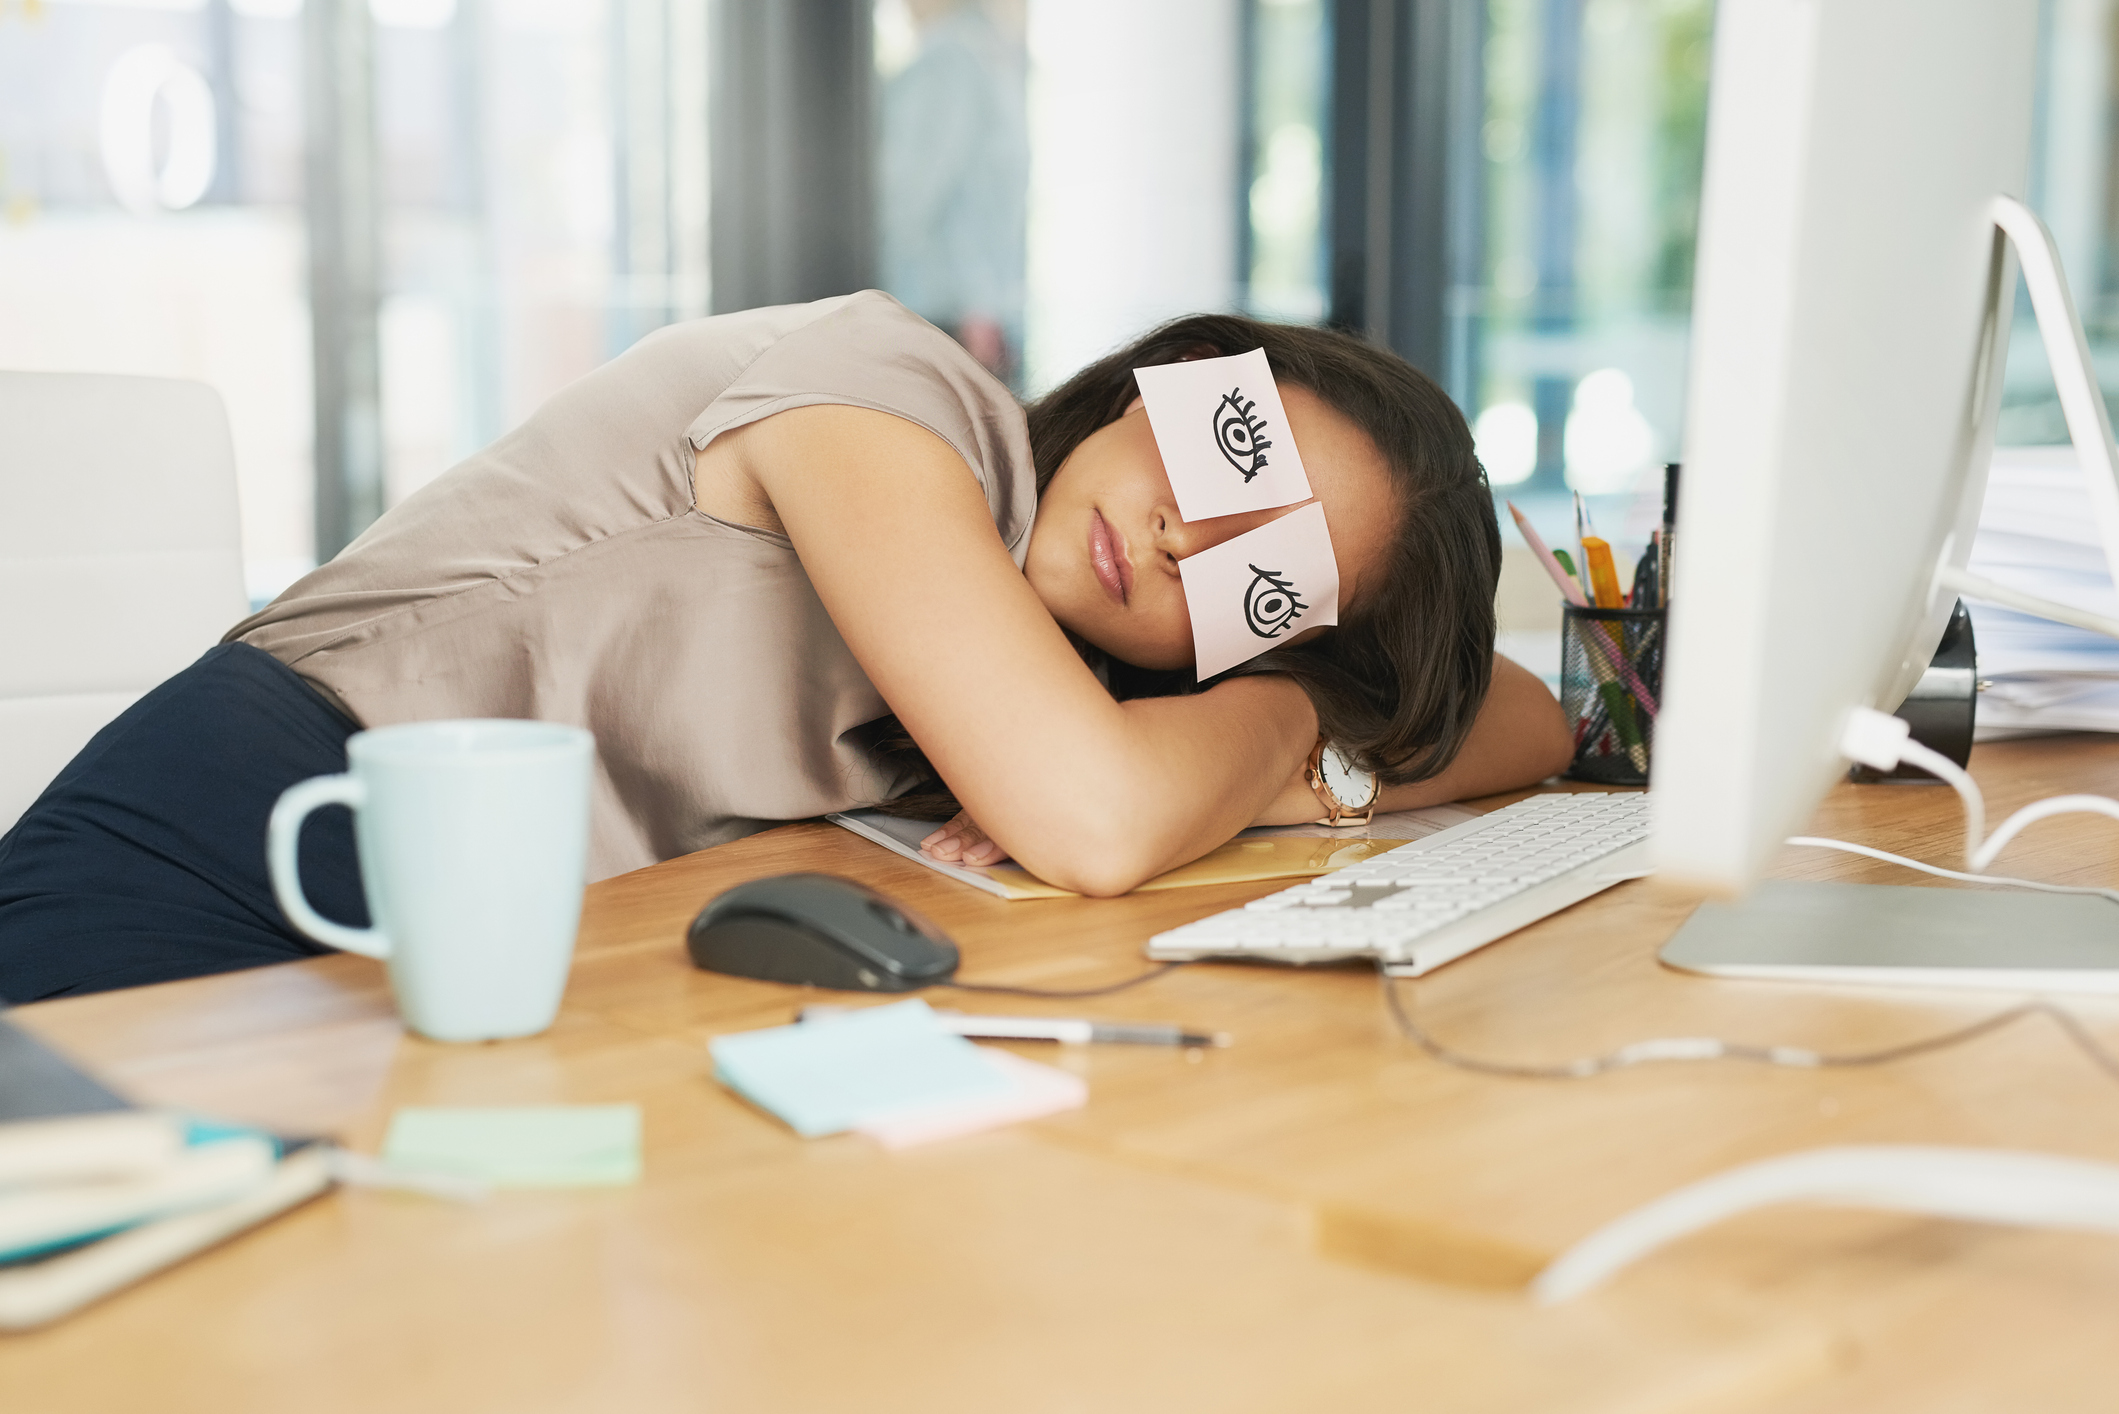 Getting More Sleep Will Improve Your Work Performance